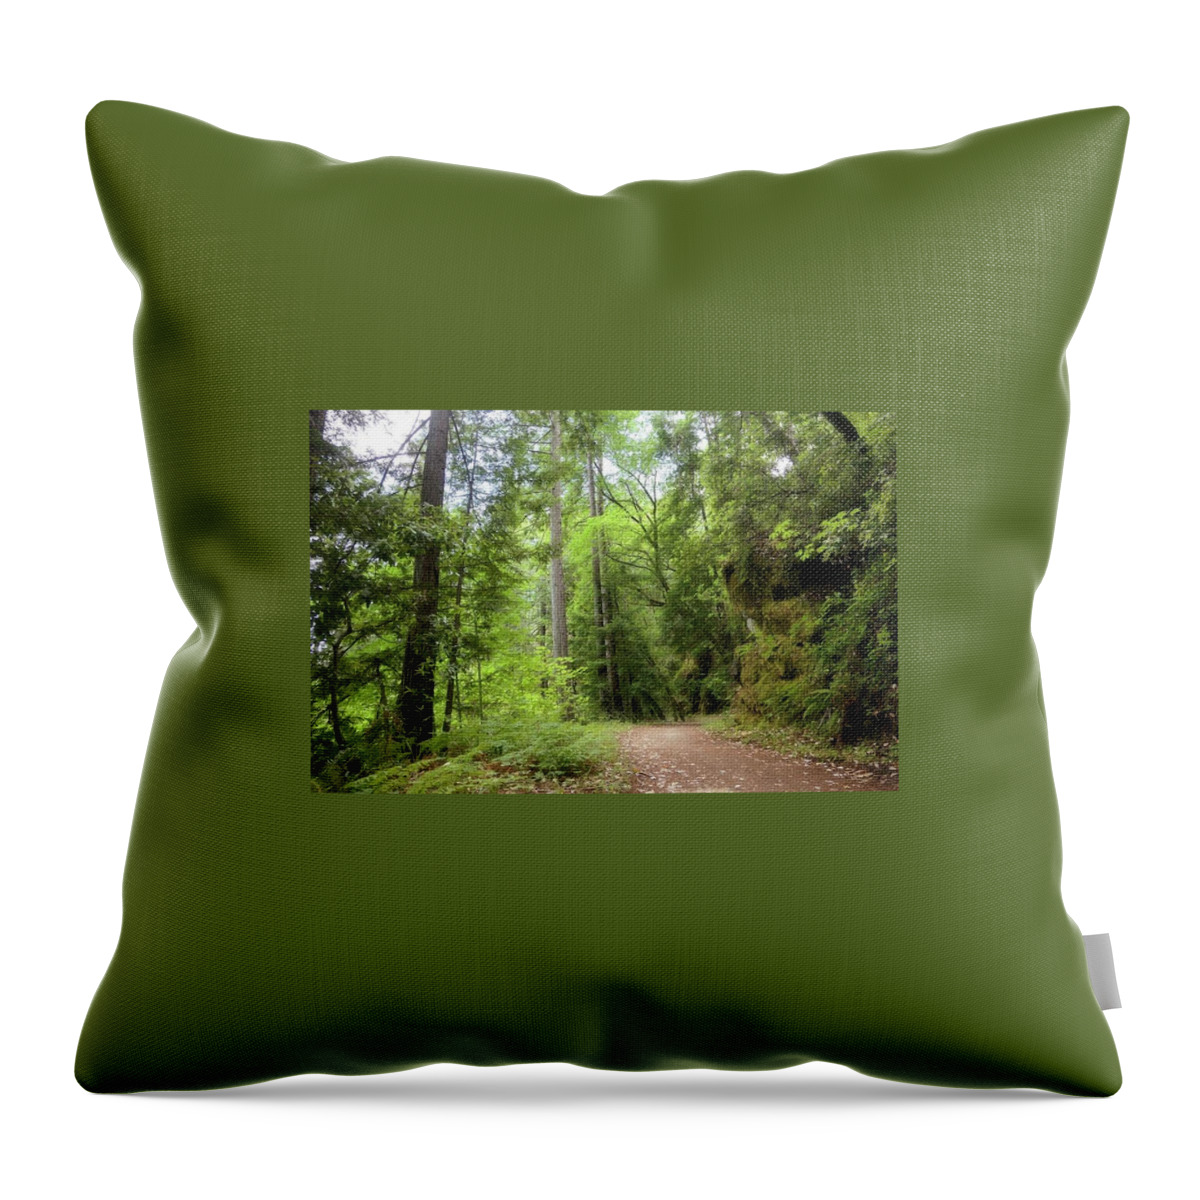 Concrete Pipe Fireroad Throw Pillow featuring the photograph Concrete Pipe Fireroad by John Parulis